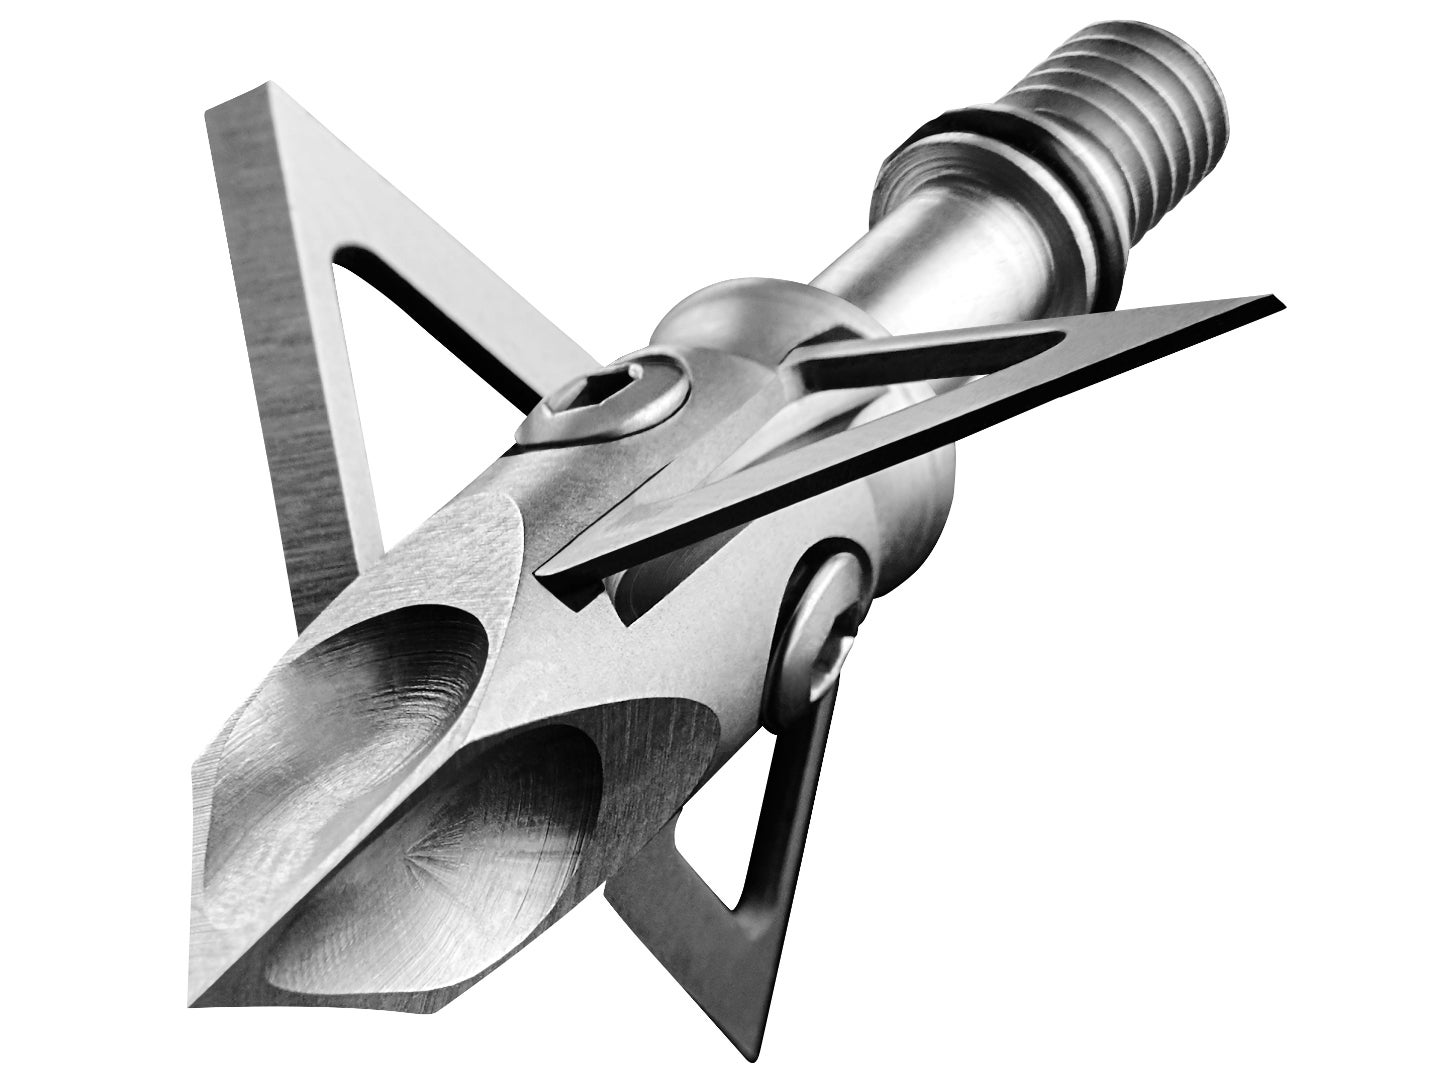 The Best New Broadheads of the Year